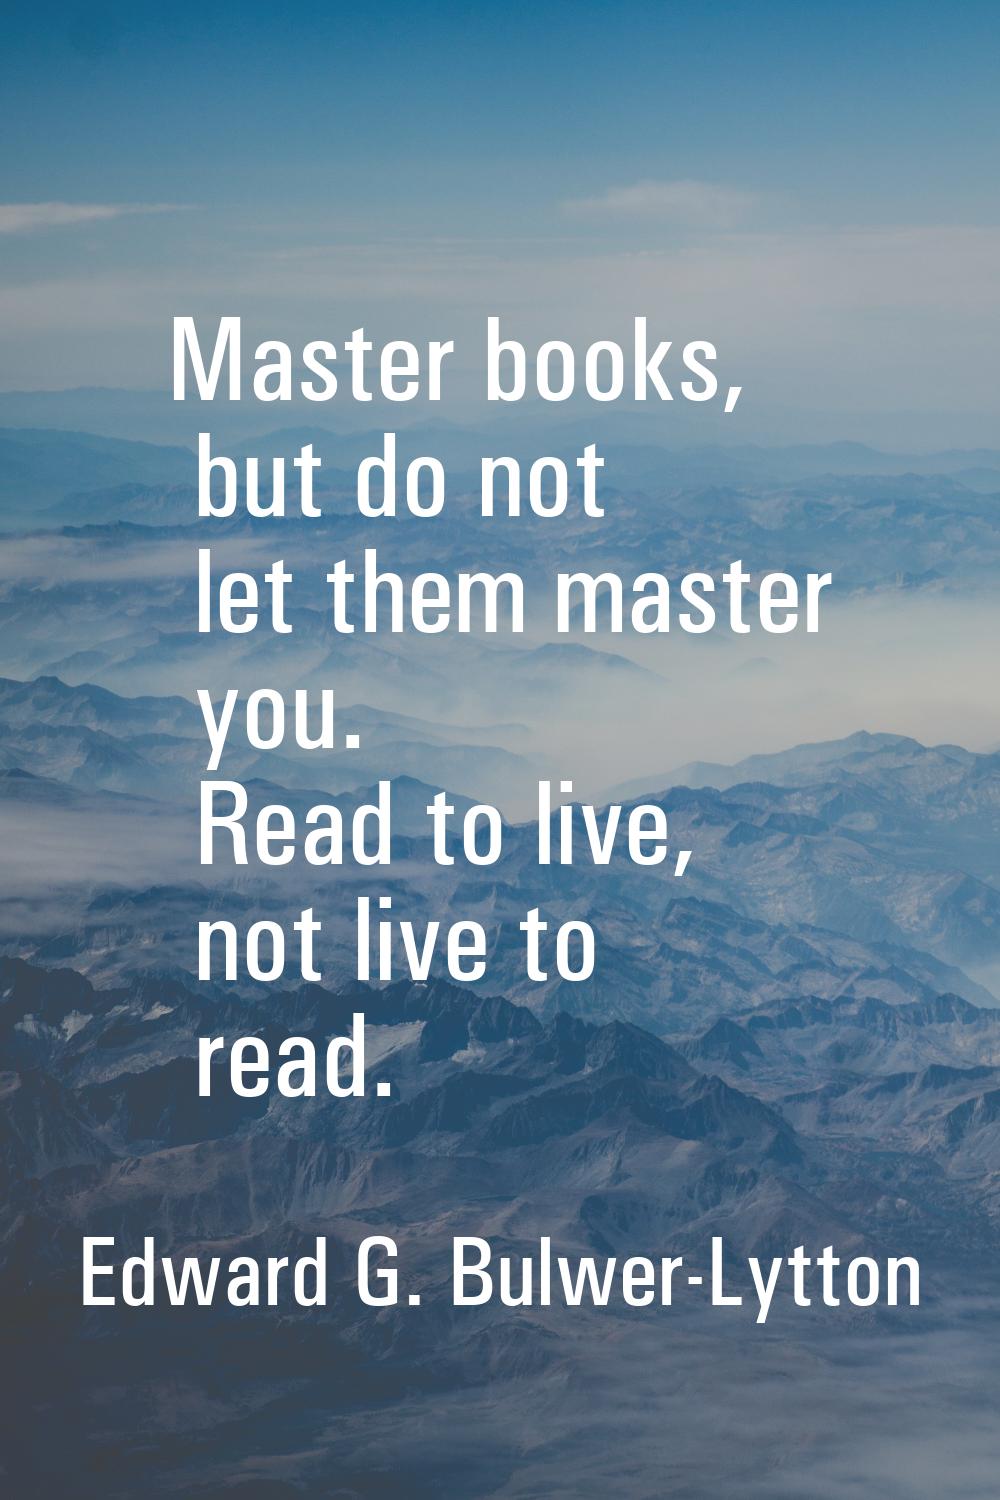 Master books, but do not let them master you. Read to live, not live to read.